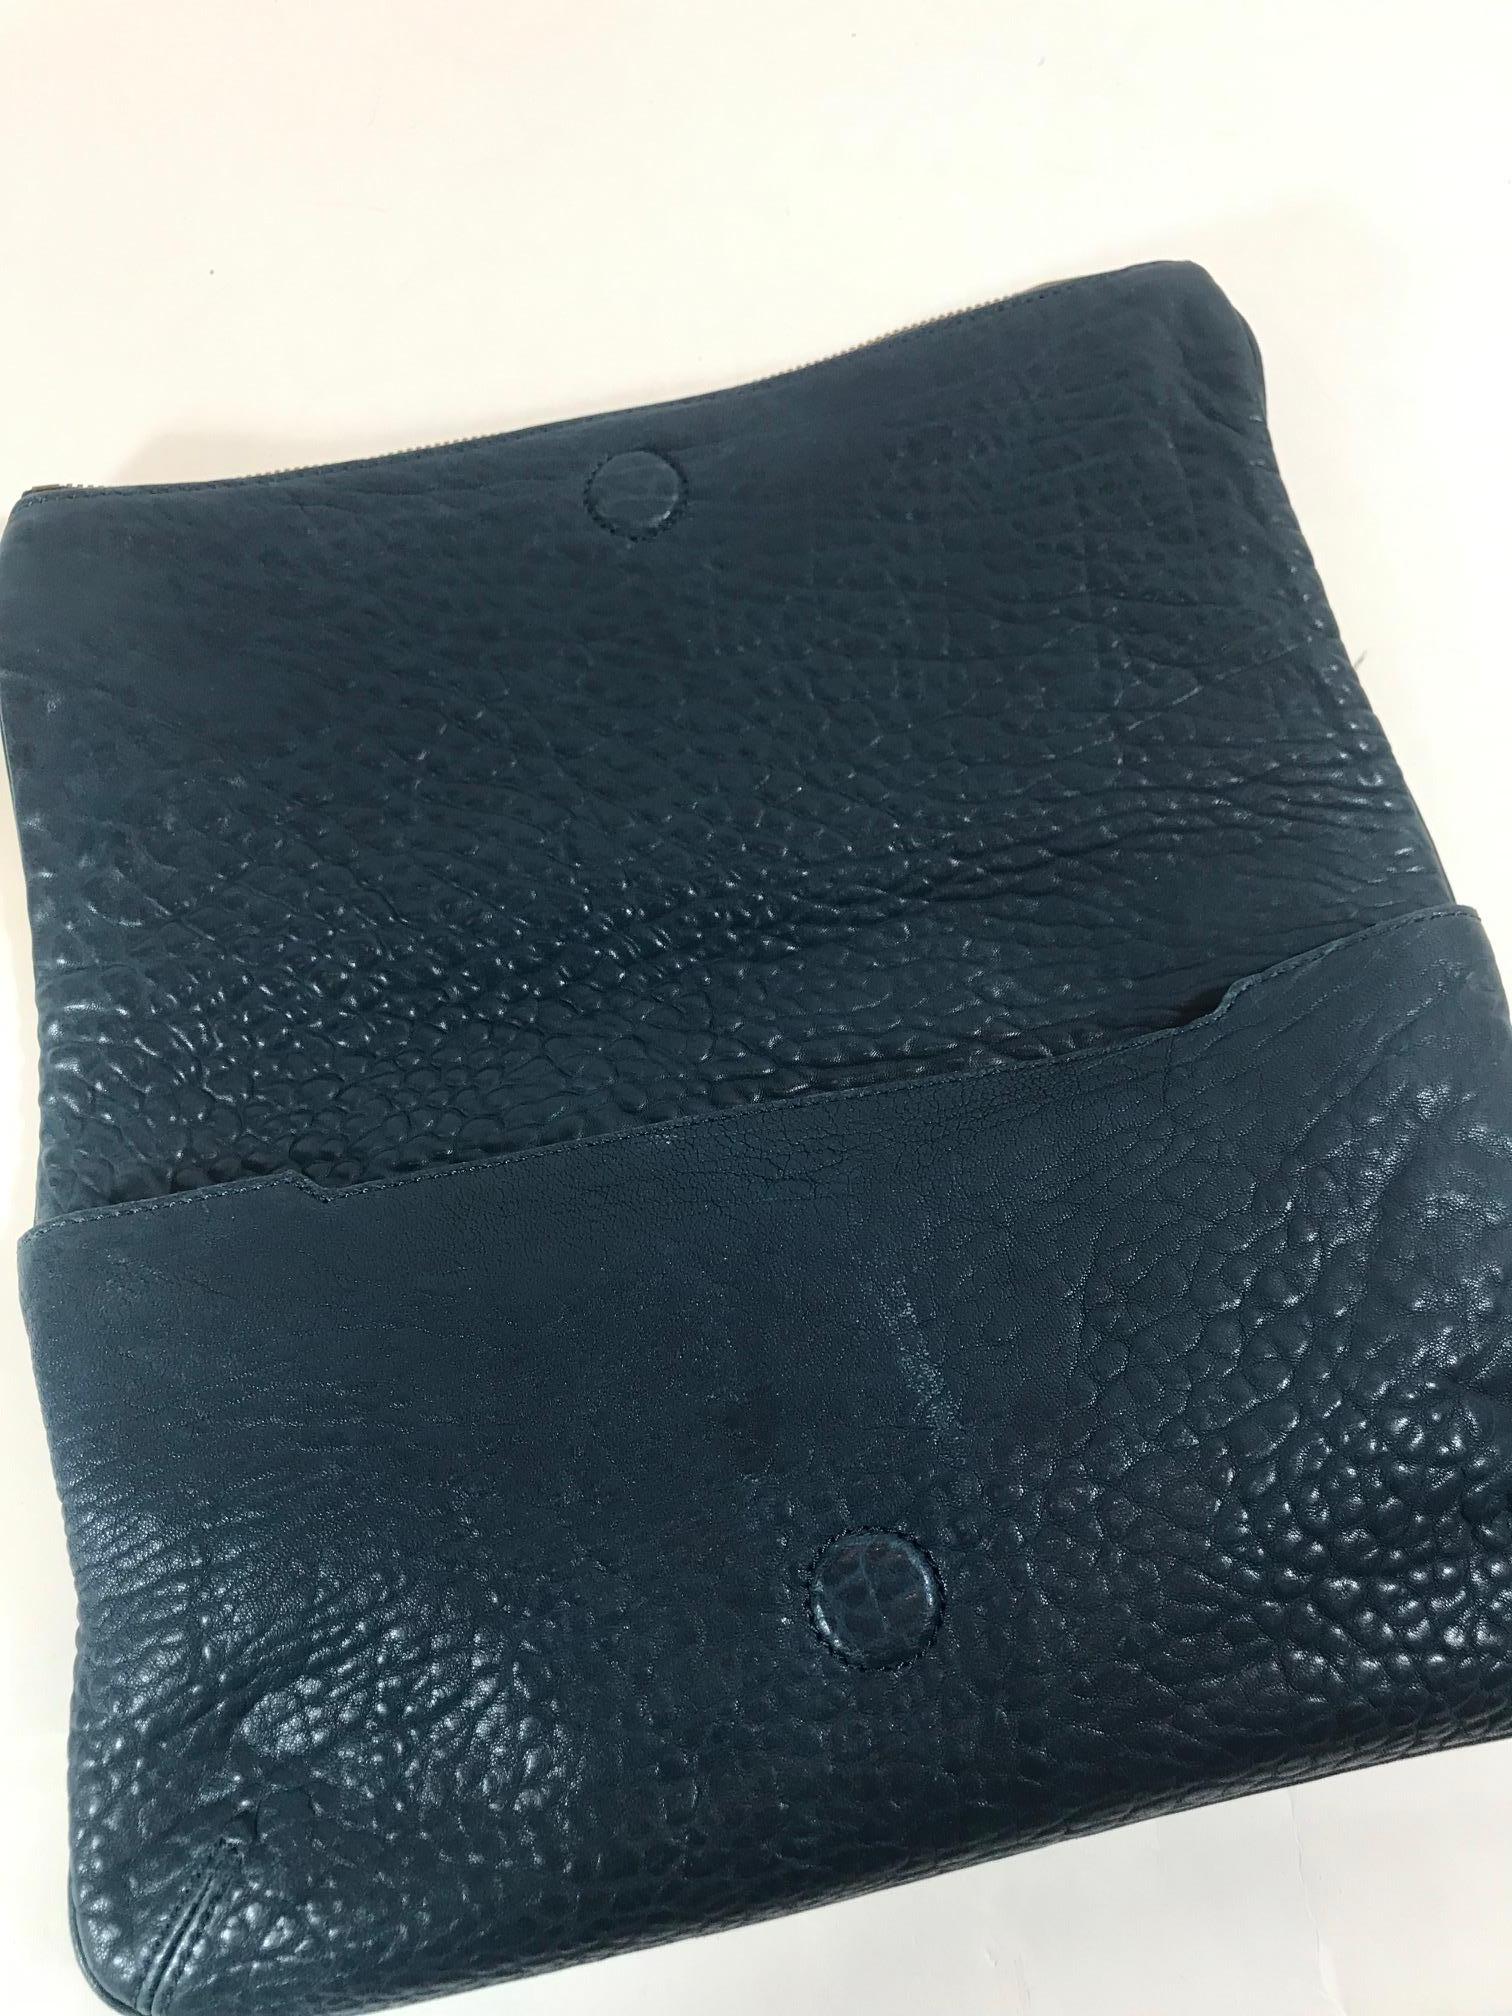 Alexander Wang Dumbo Fold-Over Clutch For Sale 3